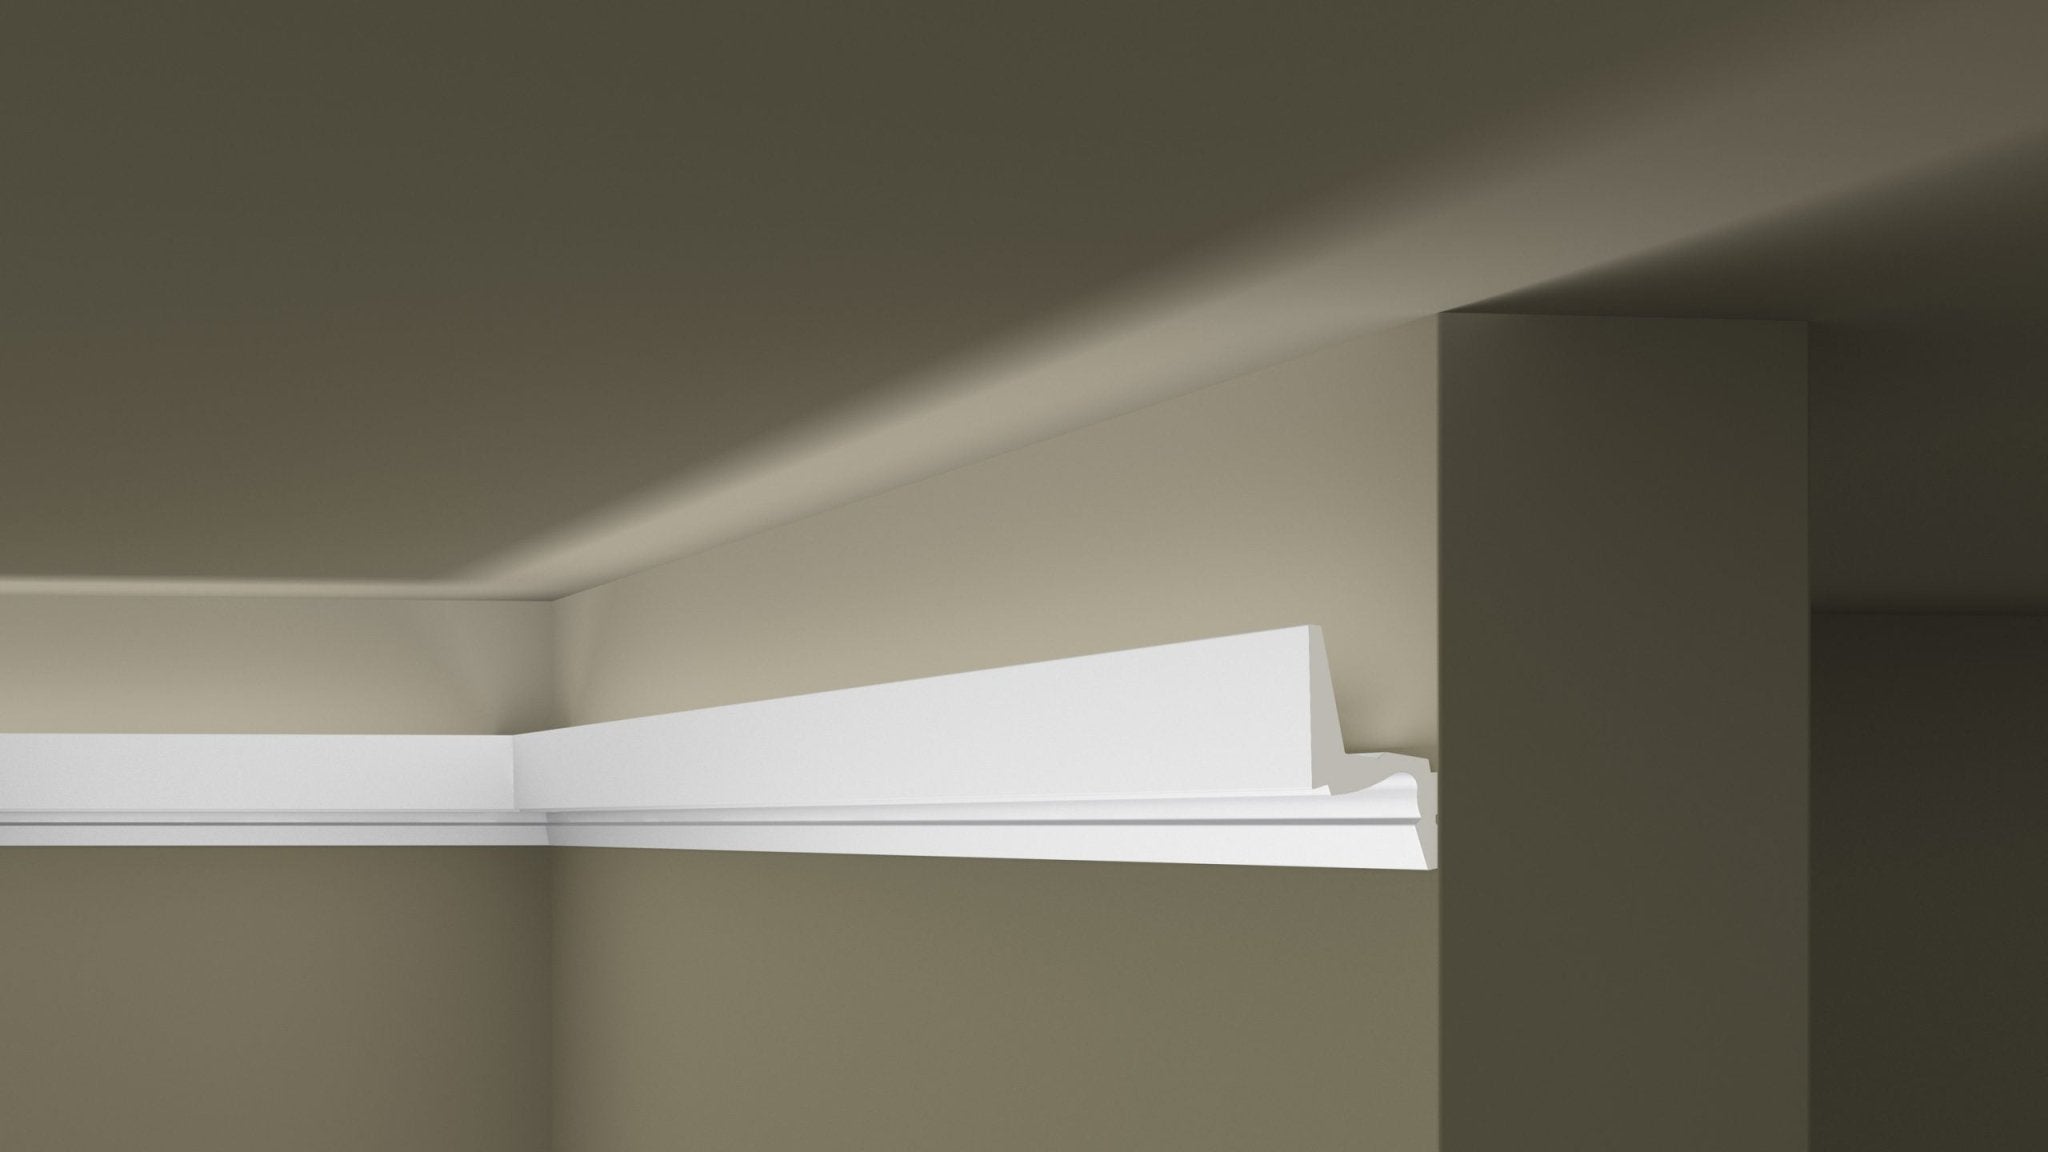 IL7 MEMORY ARSTYL 2M COVING LIGHTING SOLUTION - Covings | DecorMania